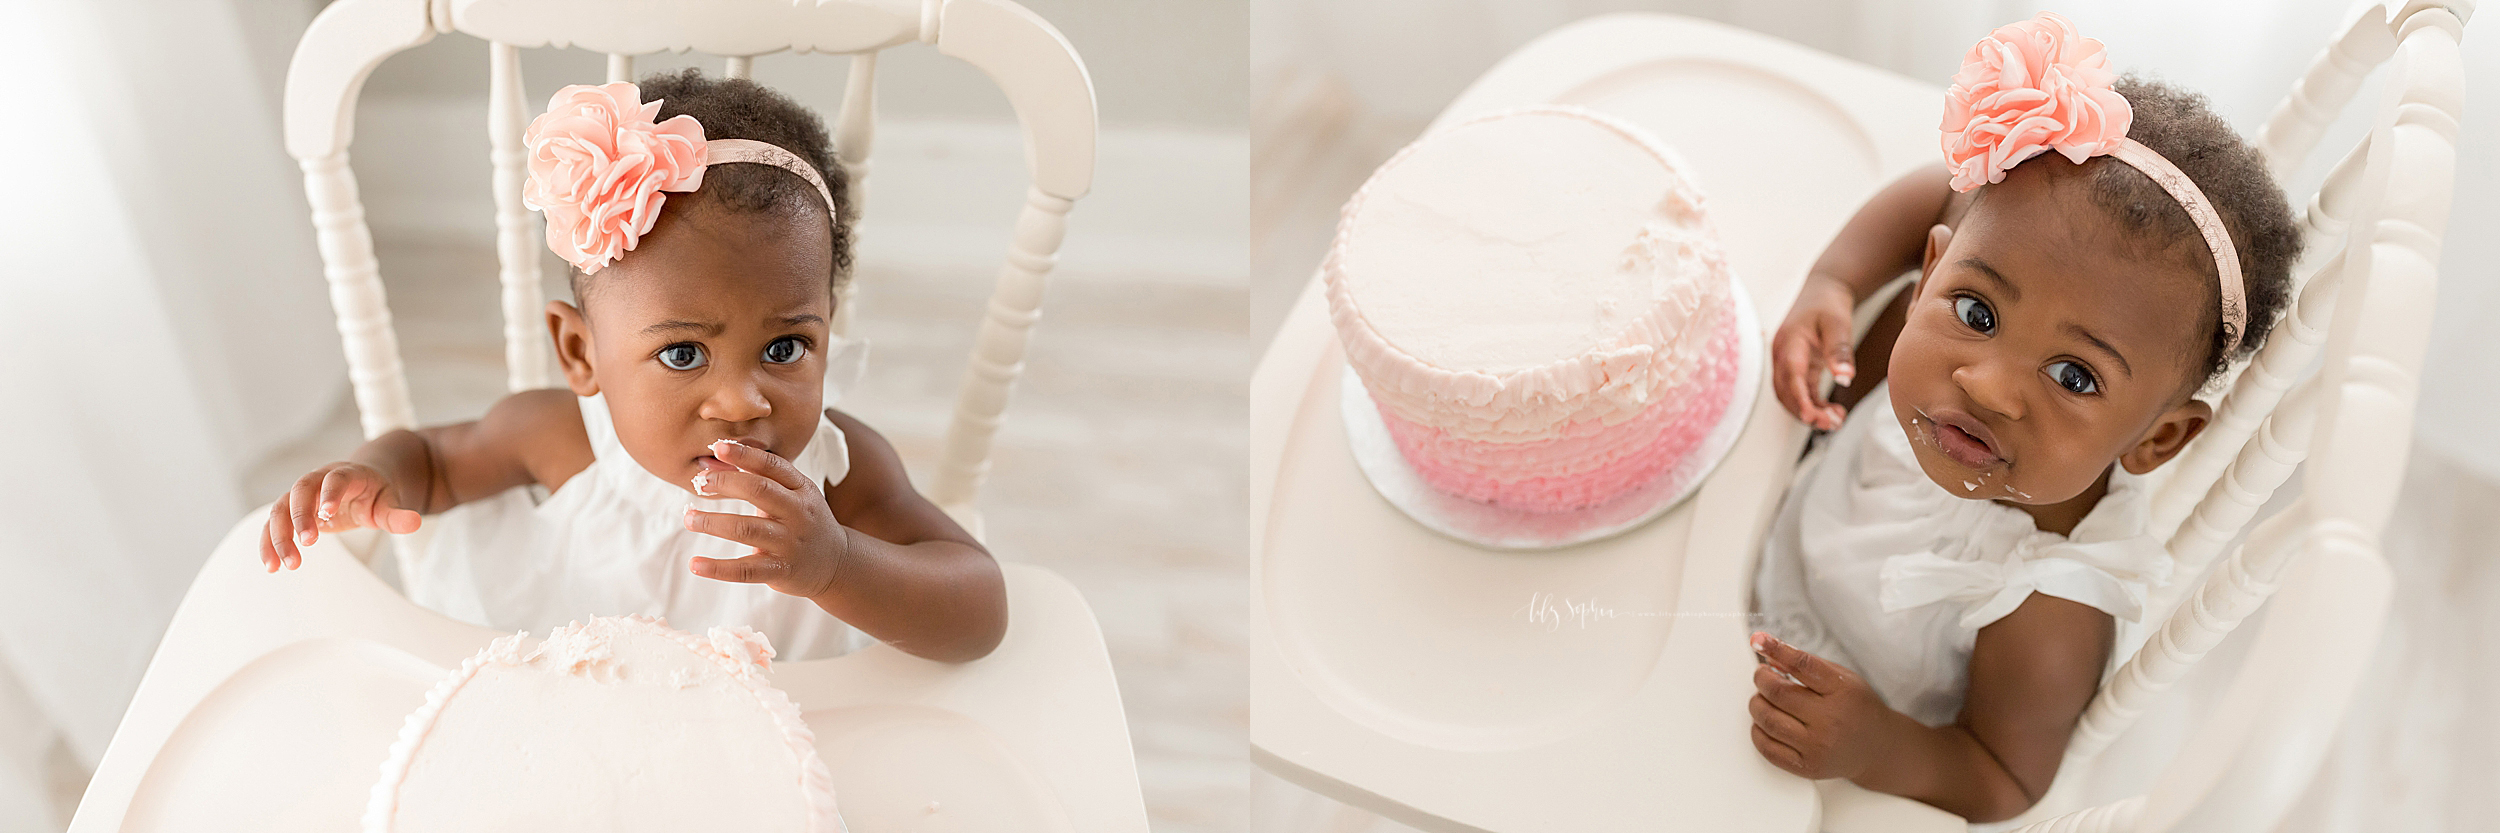 atlanta-smyrna-brookhaven-decatur-lily-sophia-photography-photographer-portraits-grant-park-intown-first-birthday-cake-smash-one-year-old-toddler-baby-girl_0019.jpg